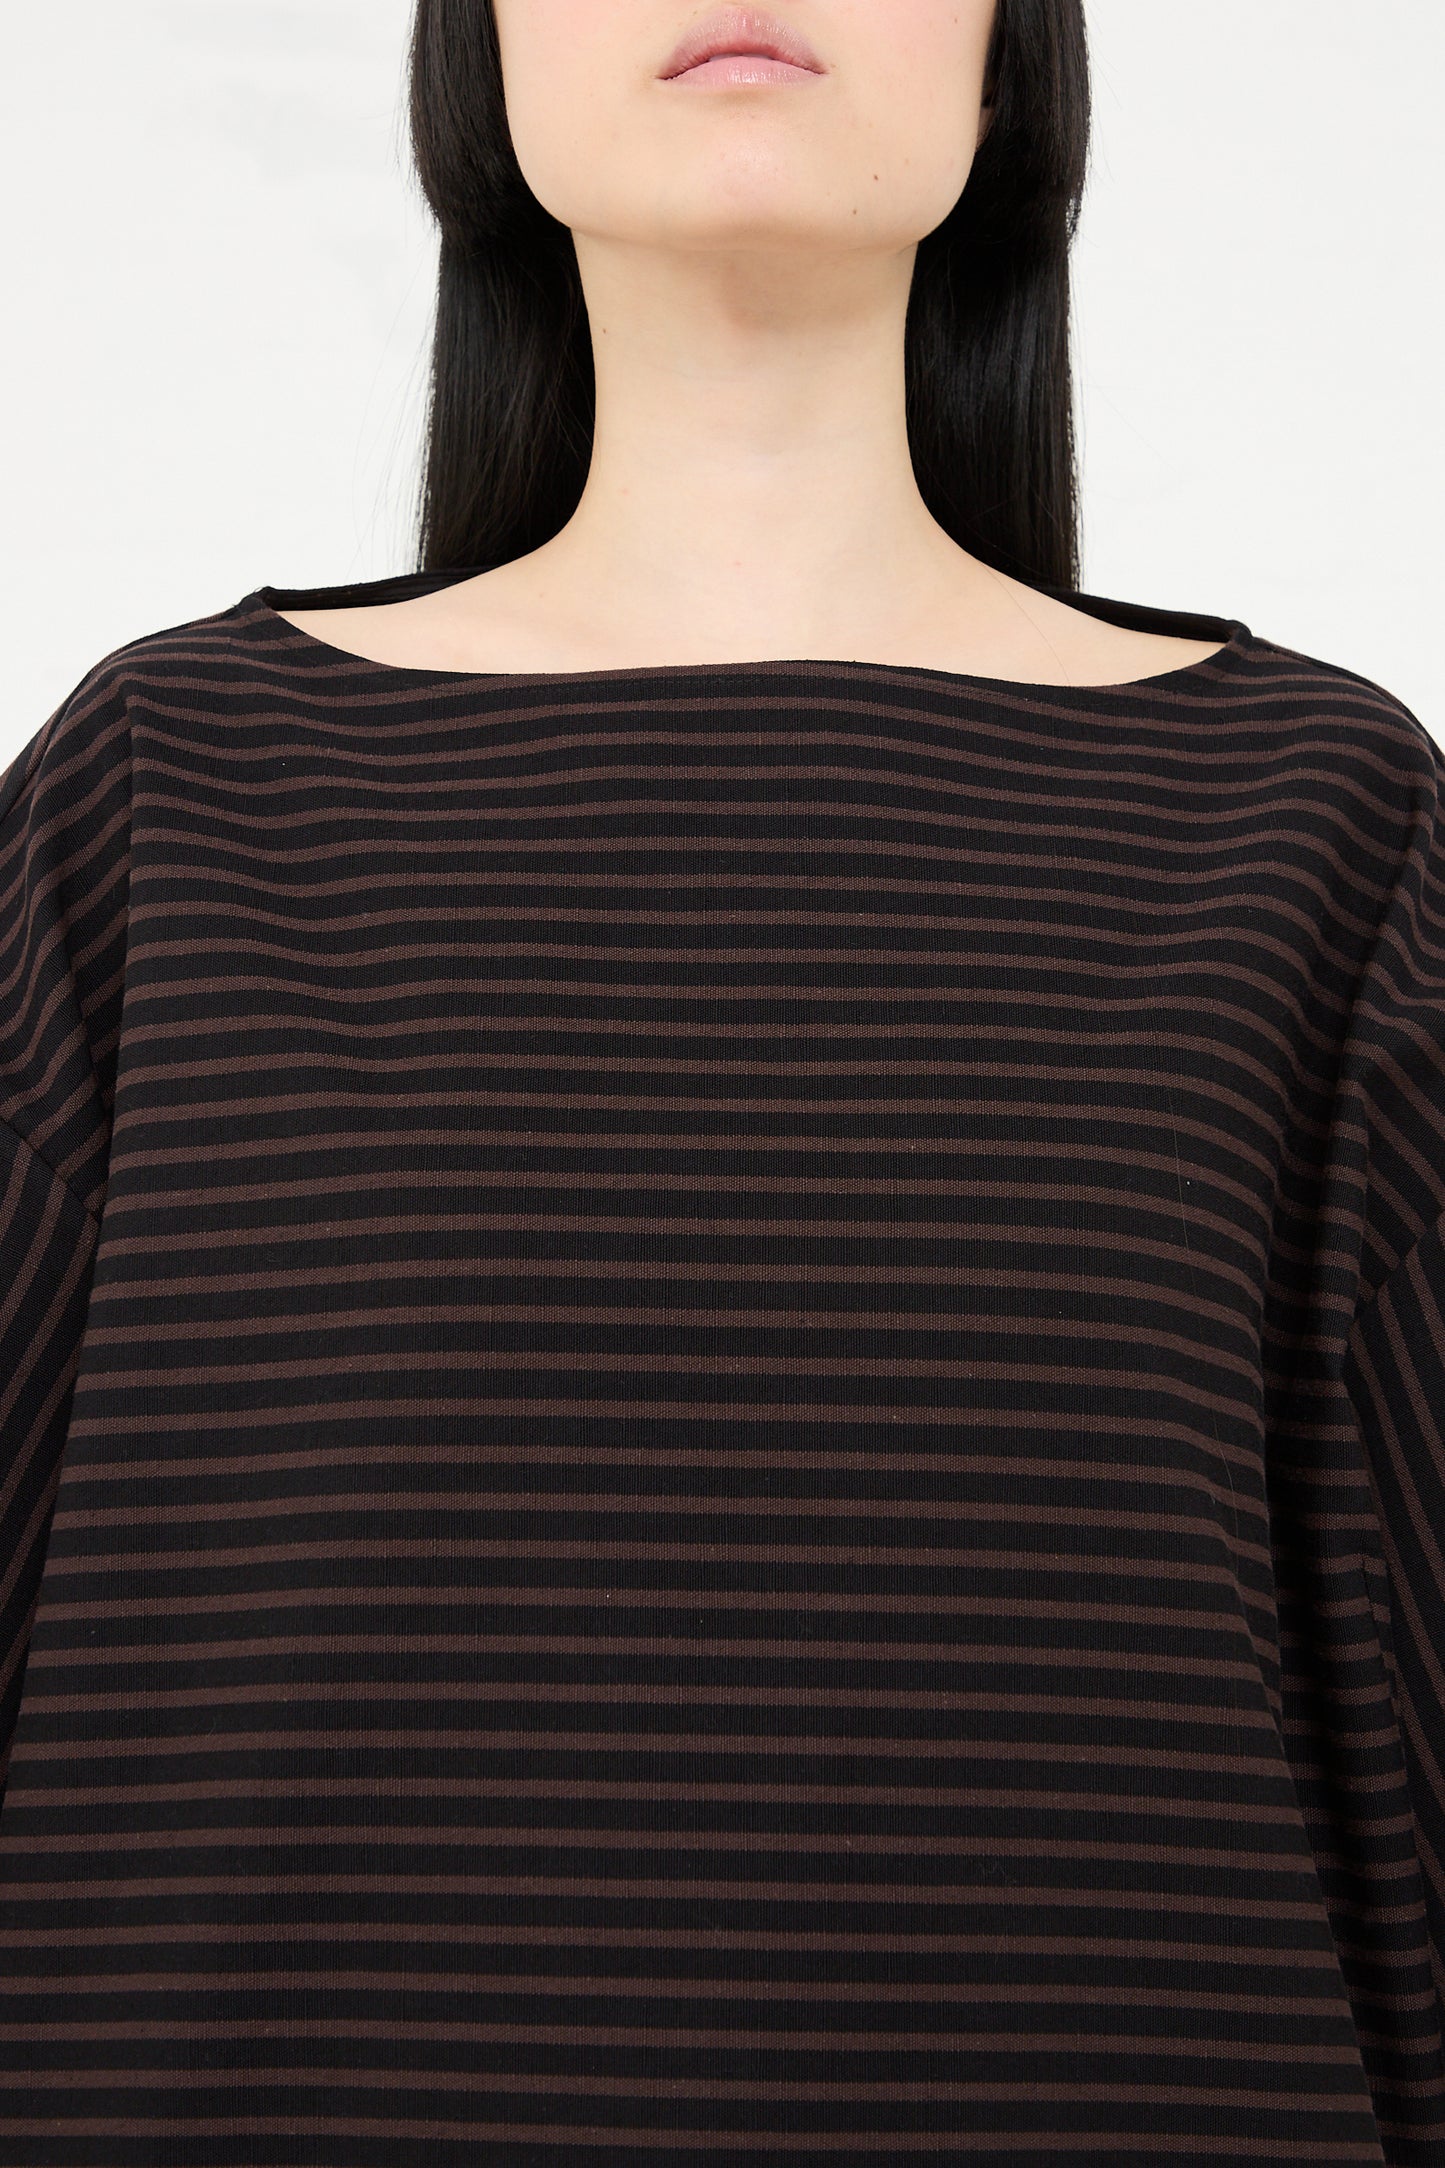 Woman wearing a Rachel Comey Ode Top in Black, cropped at the neck.